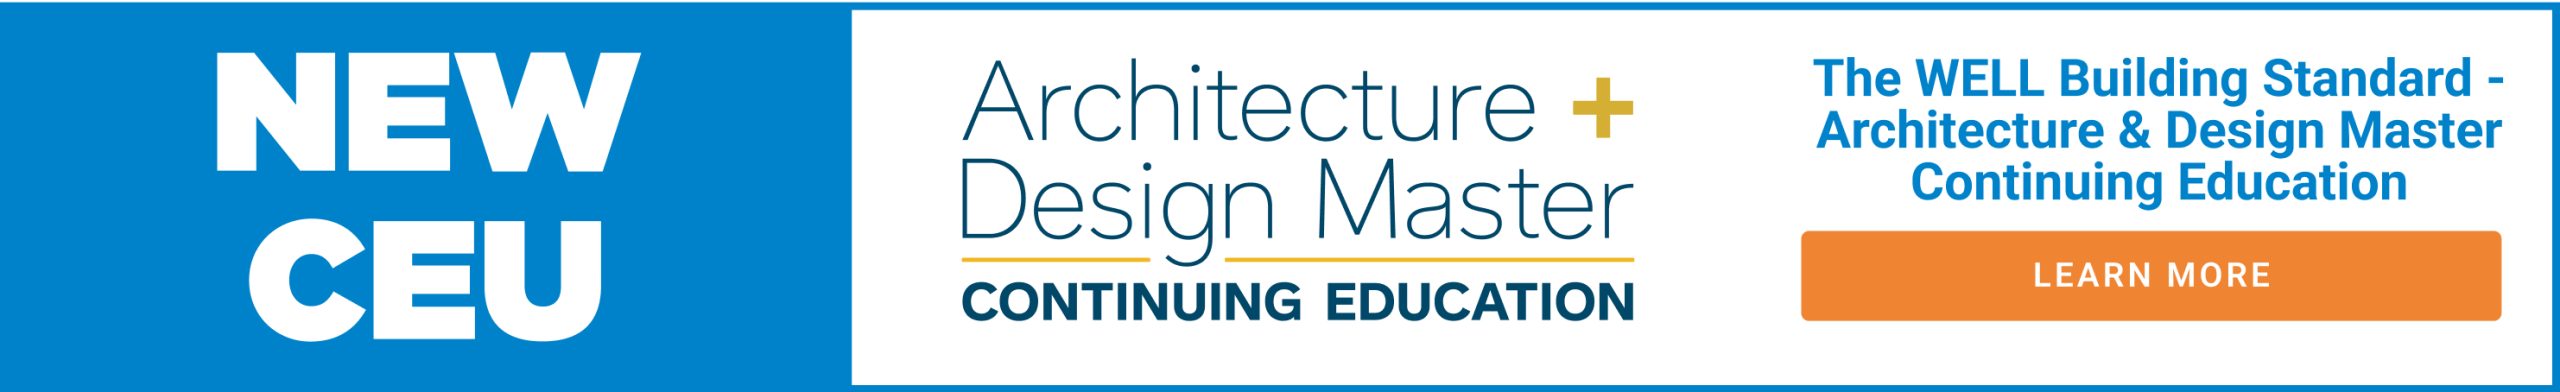 The WELL building standard - Architecture & Design Master CEU Courses - Learn More